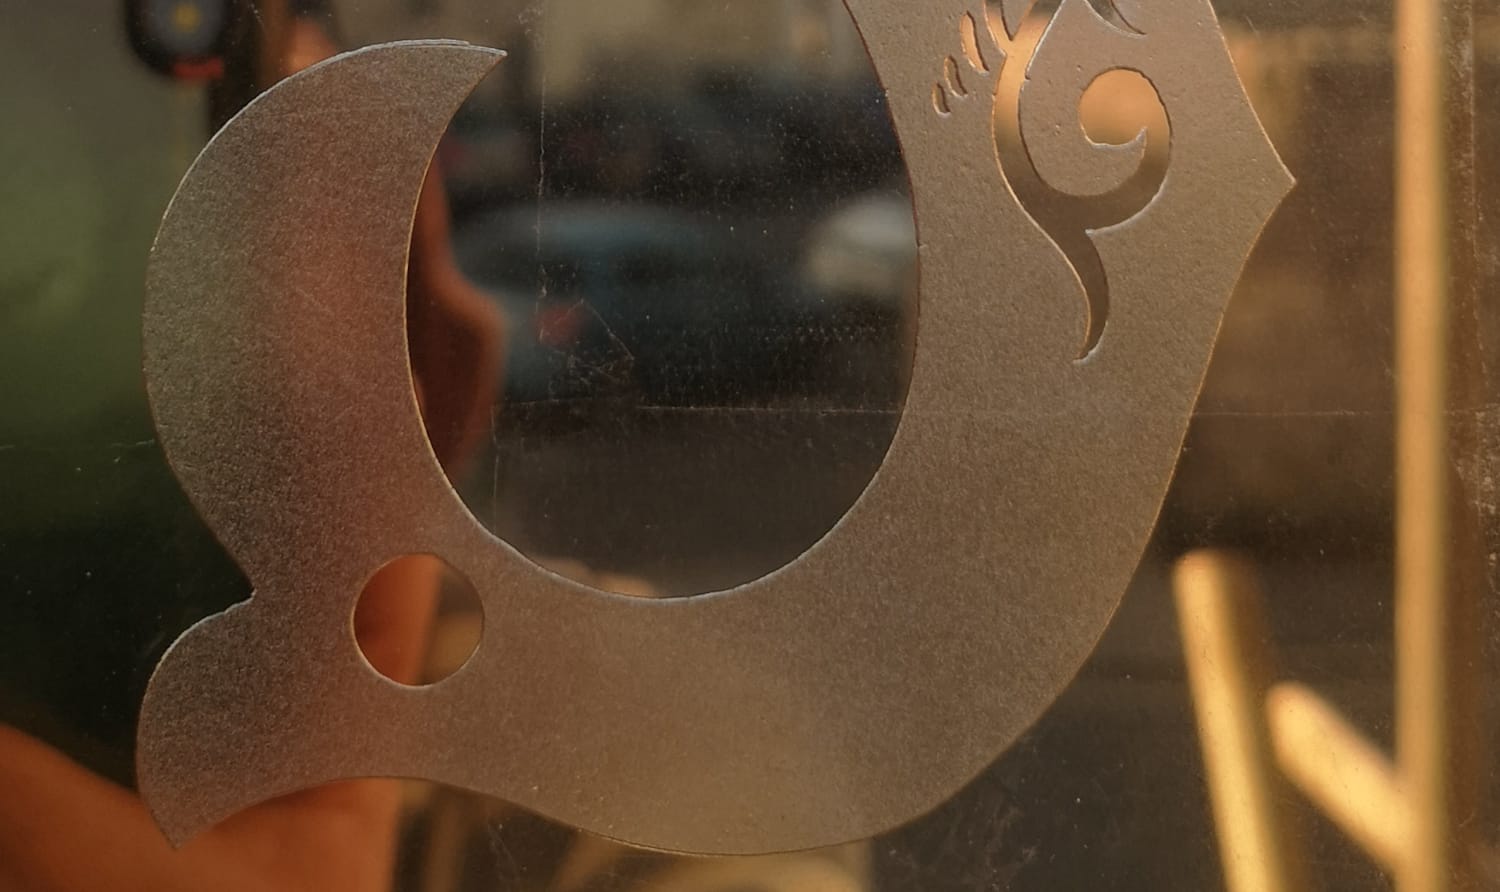 Close up of the lower part of the letter S which has been etched into the glass and appears slightly frosted/dappled versus the clear surrounds.